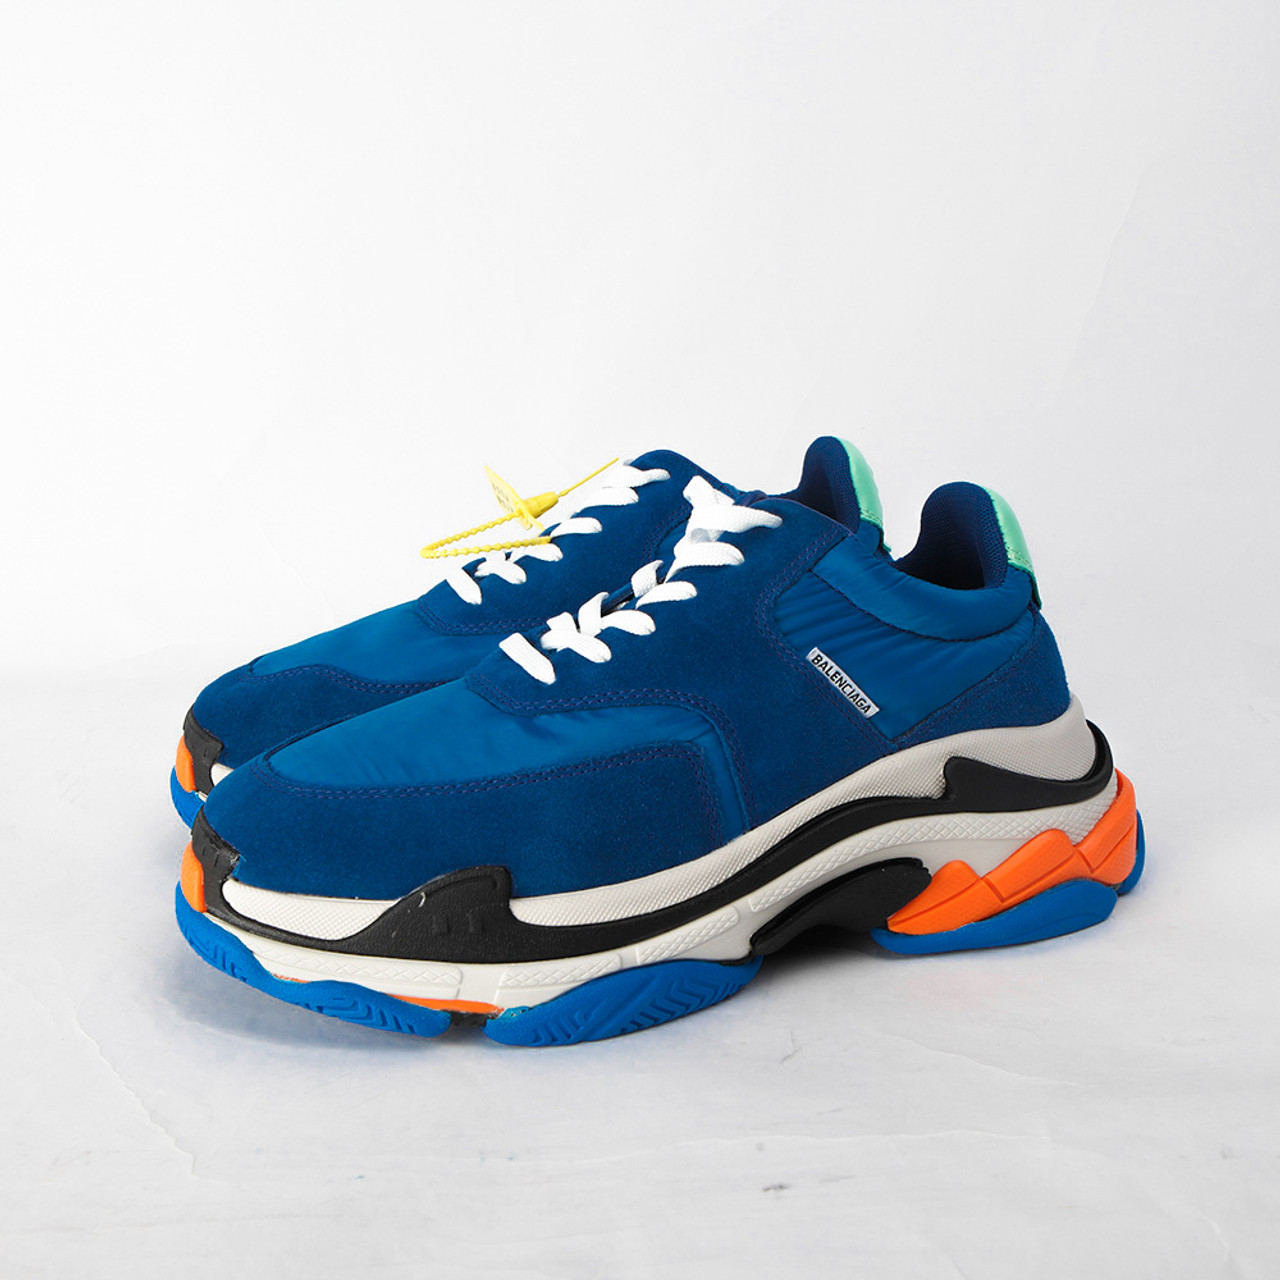 tilbehør Artifact Lighed where to buy the best stockX UA High quality replica Balenciaga Triple S  trainers Blue White Orange color sneakers Hypedripz is the best high  quality trusted clone replica fake designer hypebeast seller